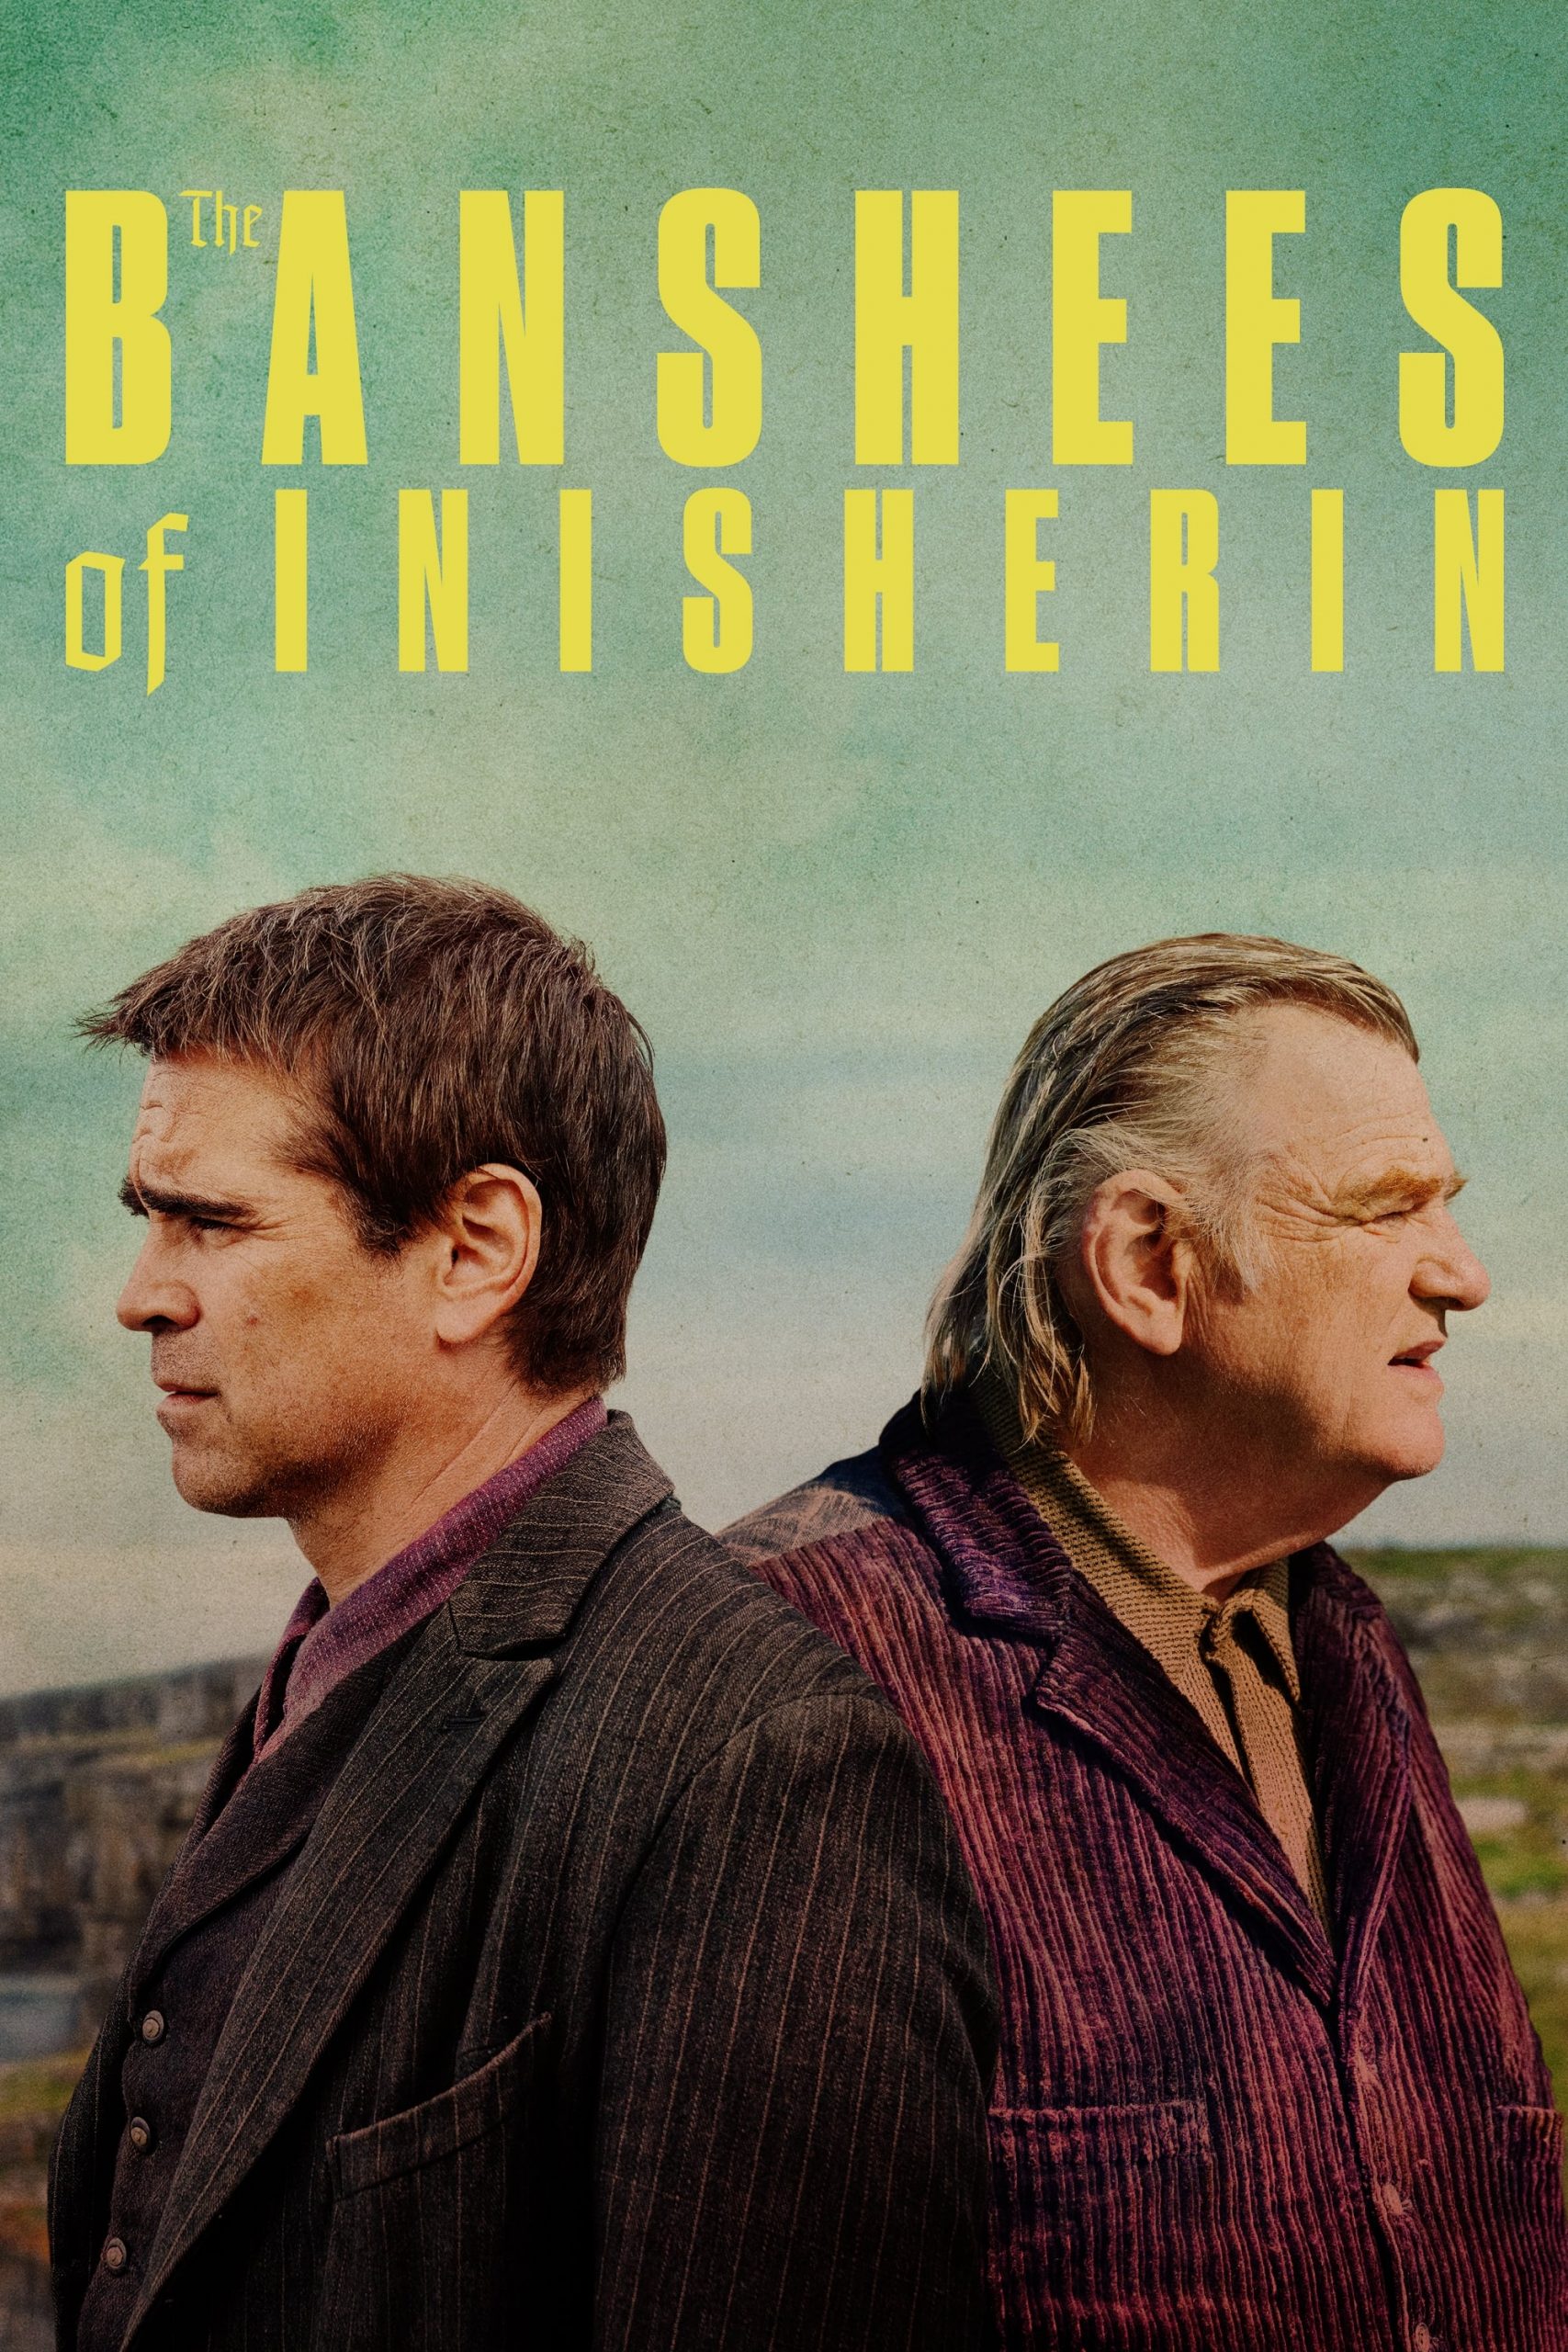 The Banshees of Inisherin. Dir. Martin McDonagh. Searchlight Pictures. 2015